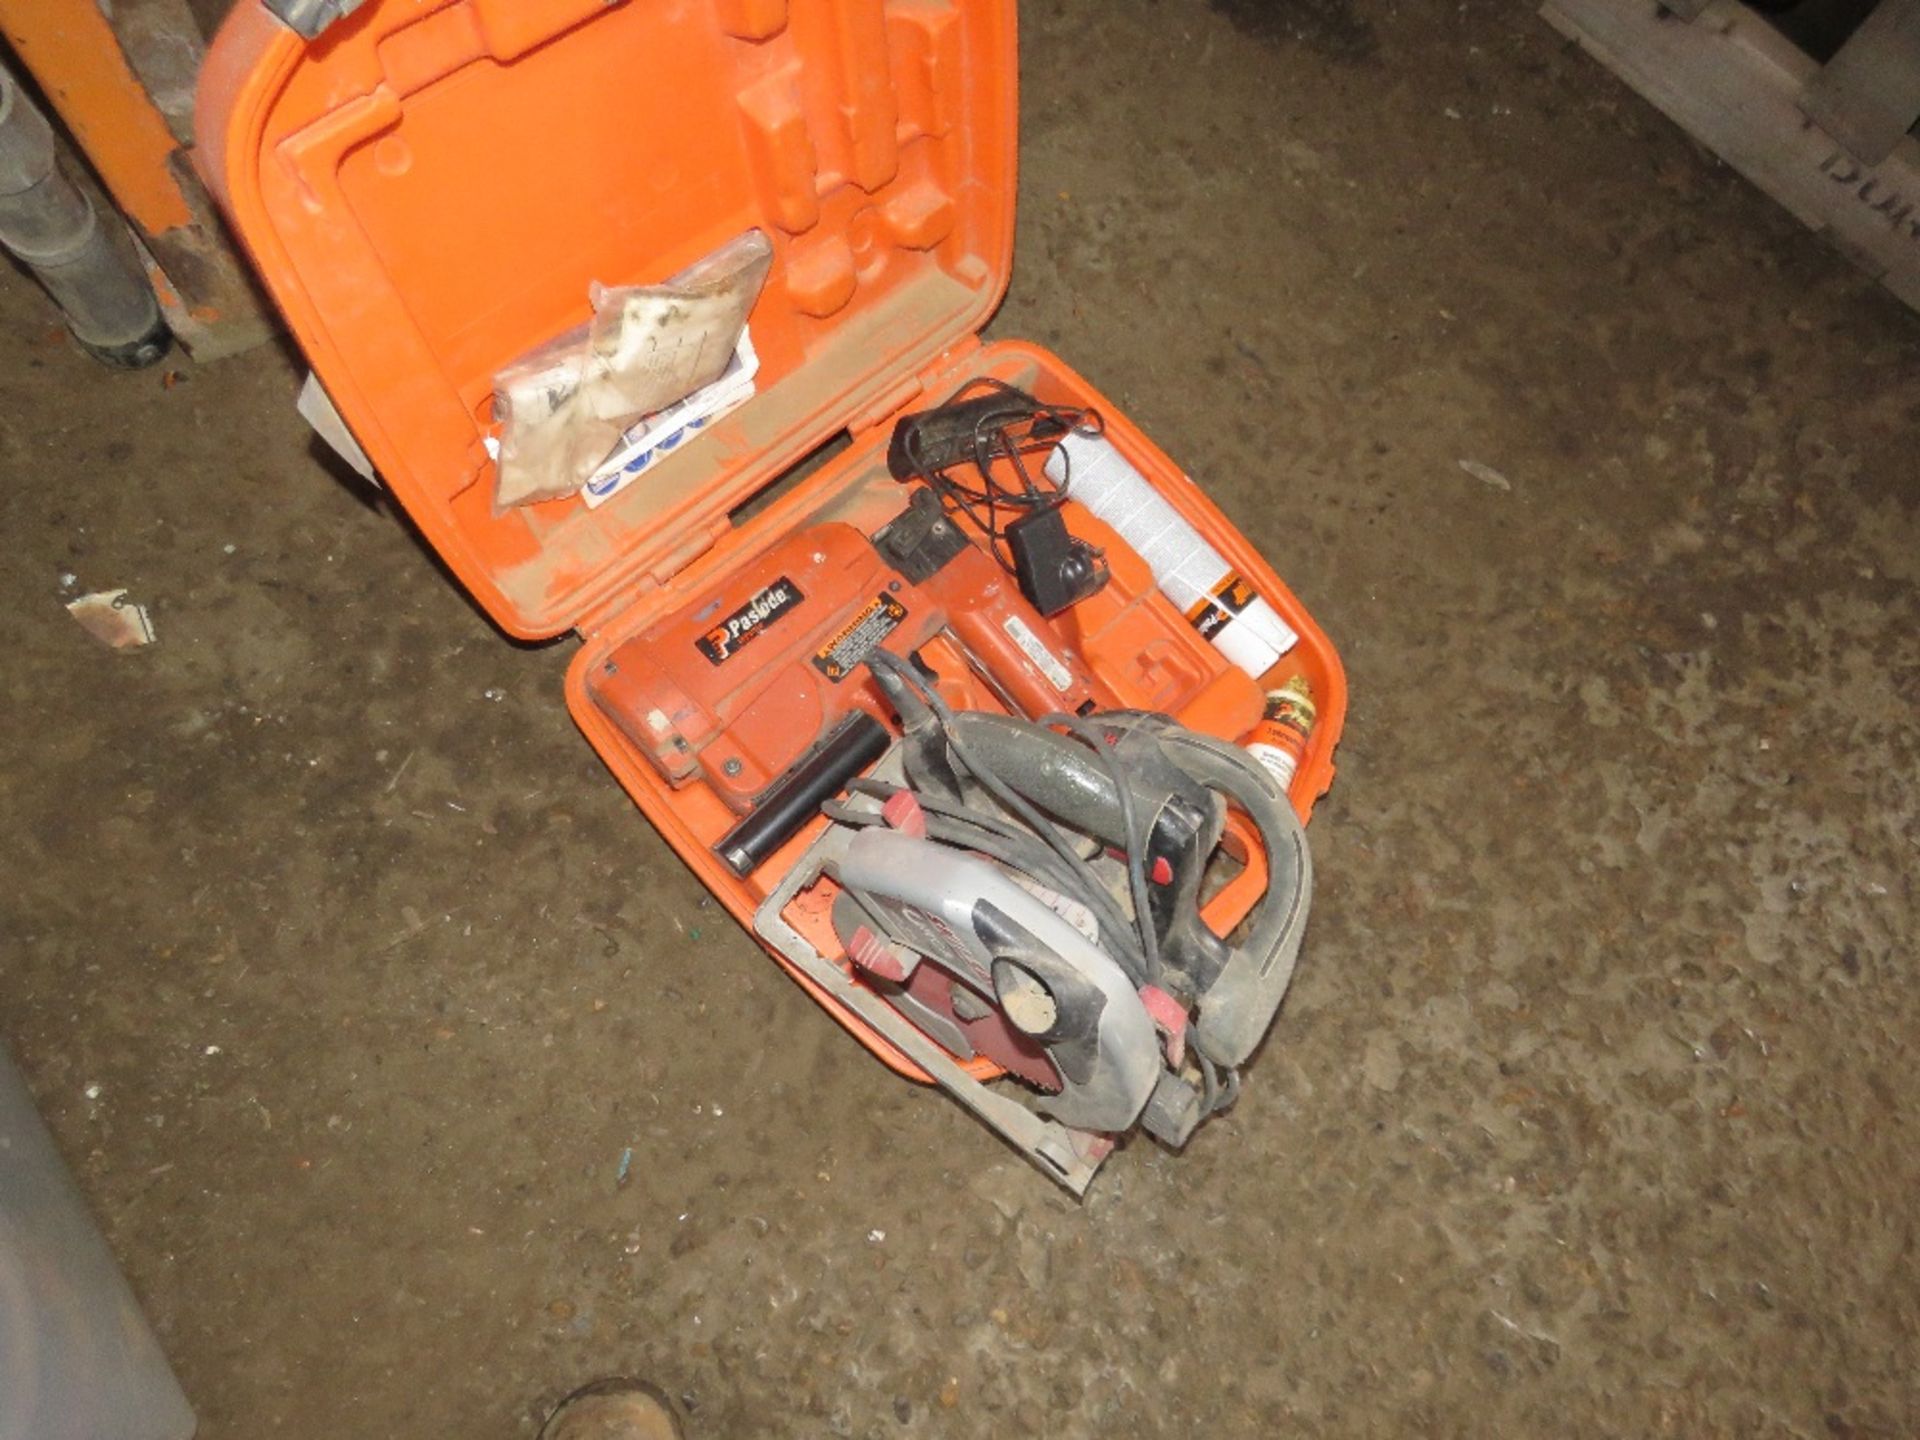 PASLODE SECOND FIX NAIL GUN PLUS SKIL SAW, 240VOLT. THIS LOT IS SOLD UNDER THE AUCTIONEERS MARGIN SC